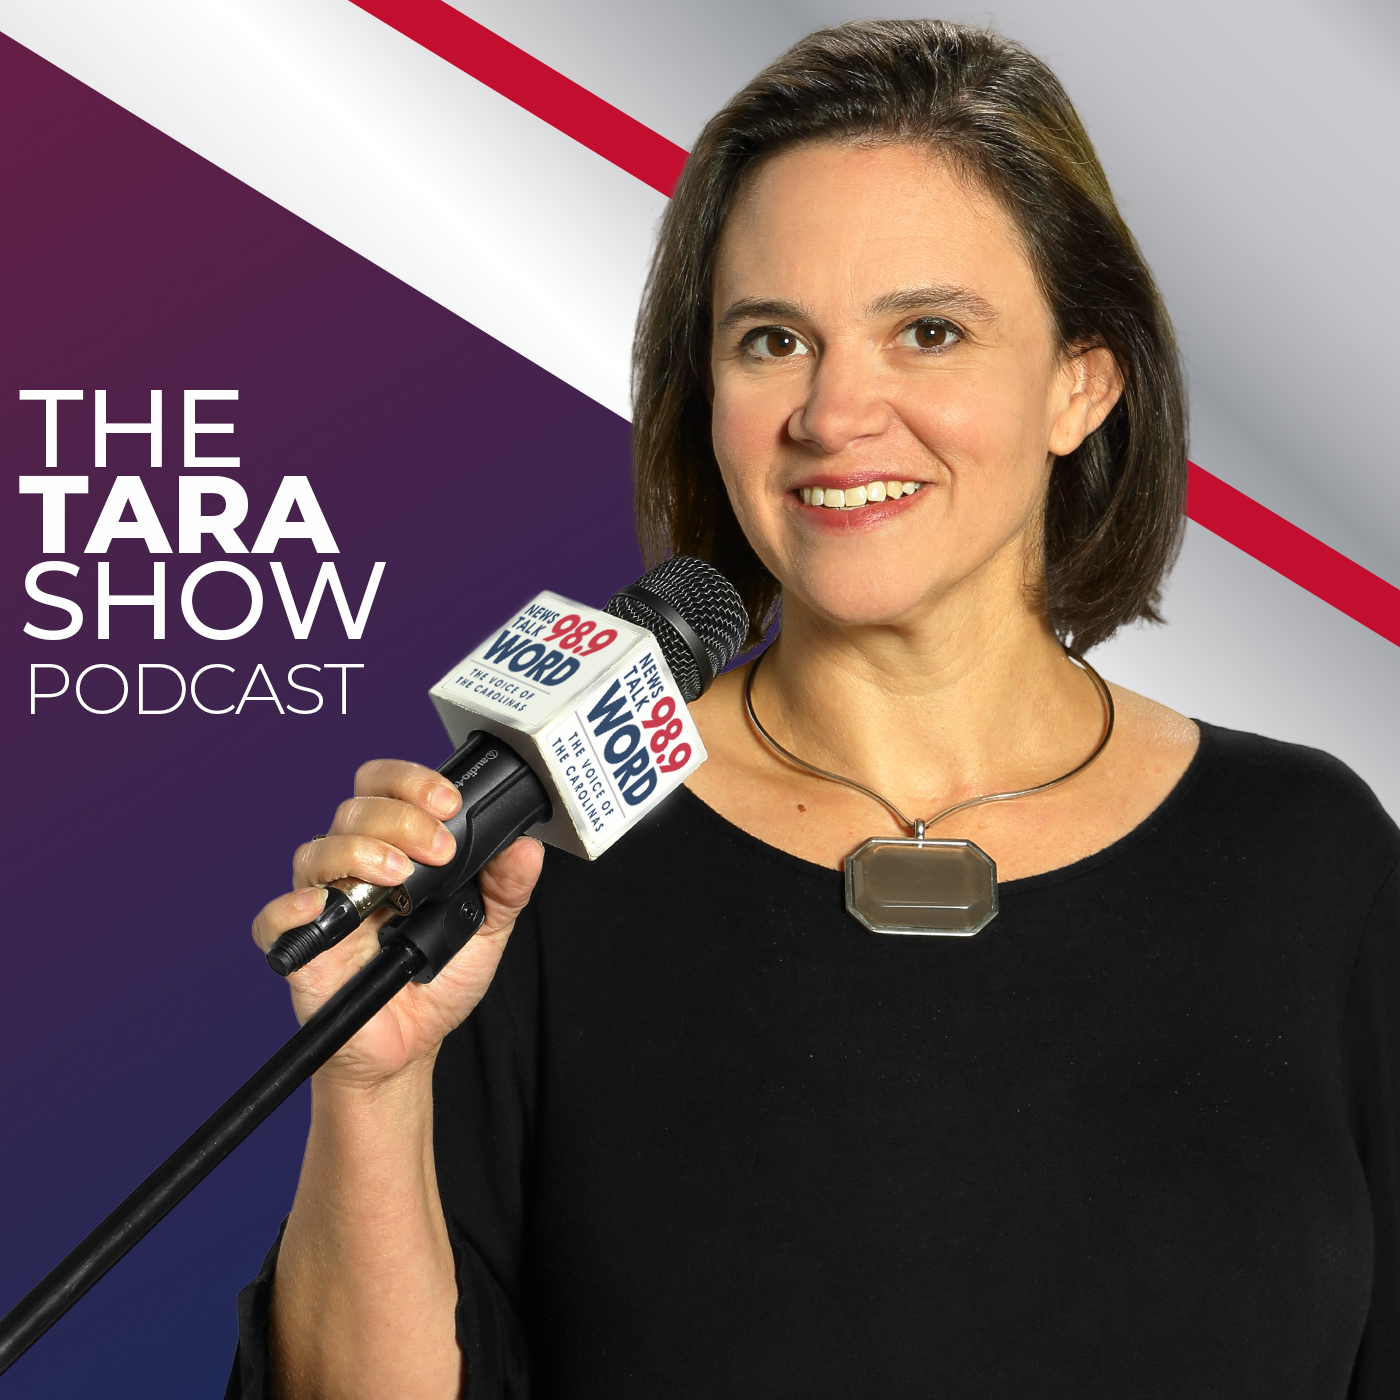 Hour 1: The Tara Show - “Is Sherri Biggs Payed off by Bloomberg?” “The Sherri Biggs and Bloomberg Connection” “State Roads to be Fixed AGAIN” “Get out and Vote”